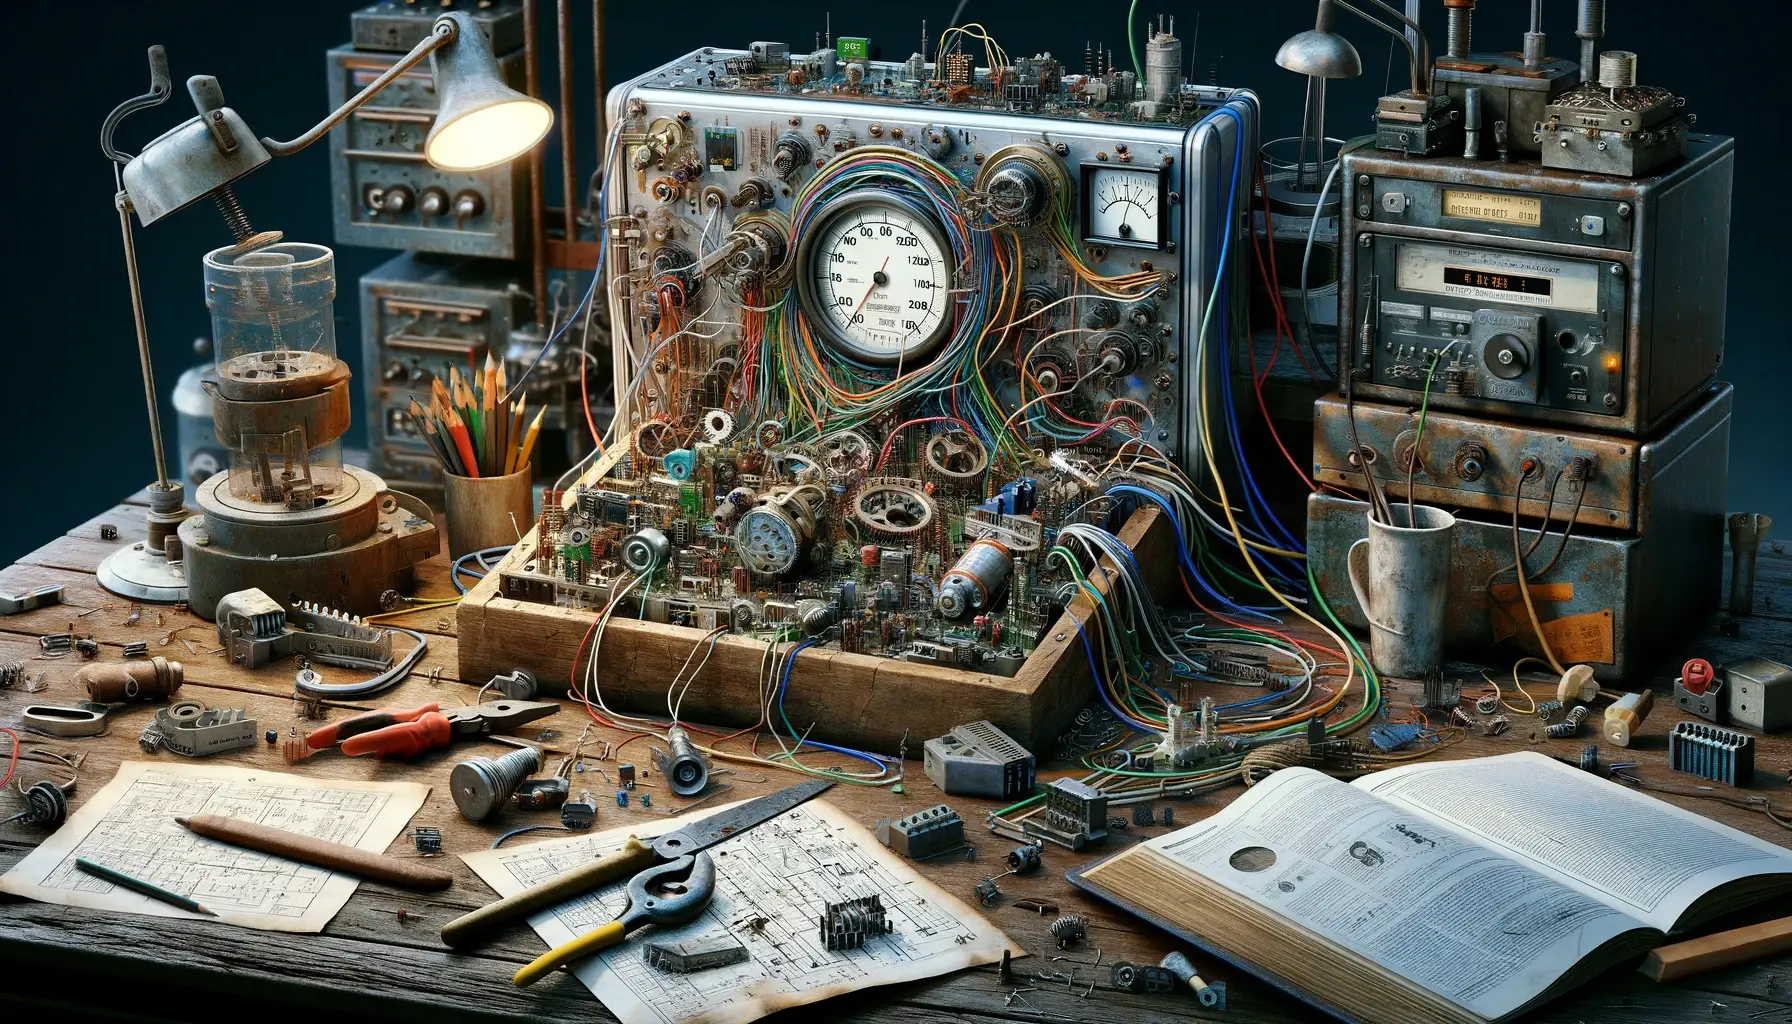 image illustrating the electrical engineering challenges in Mike Marcum's Time Machine project